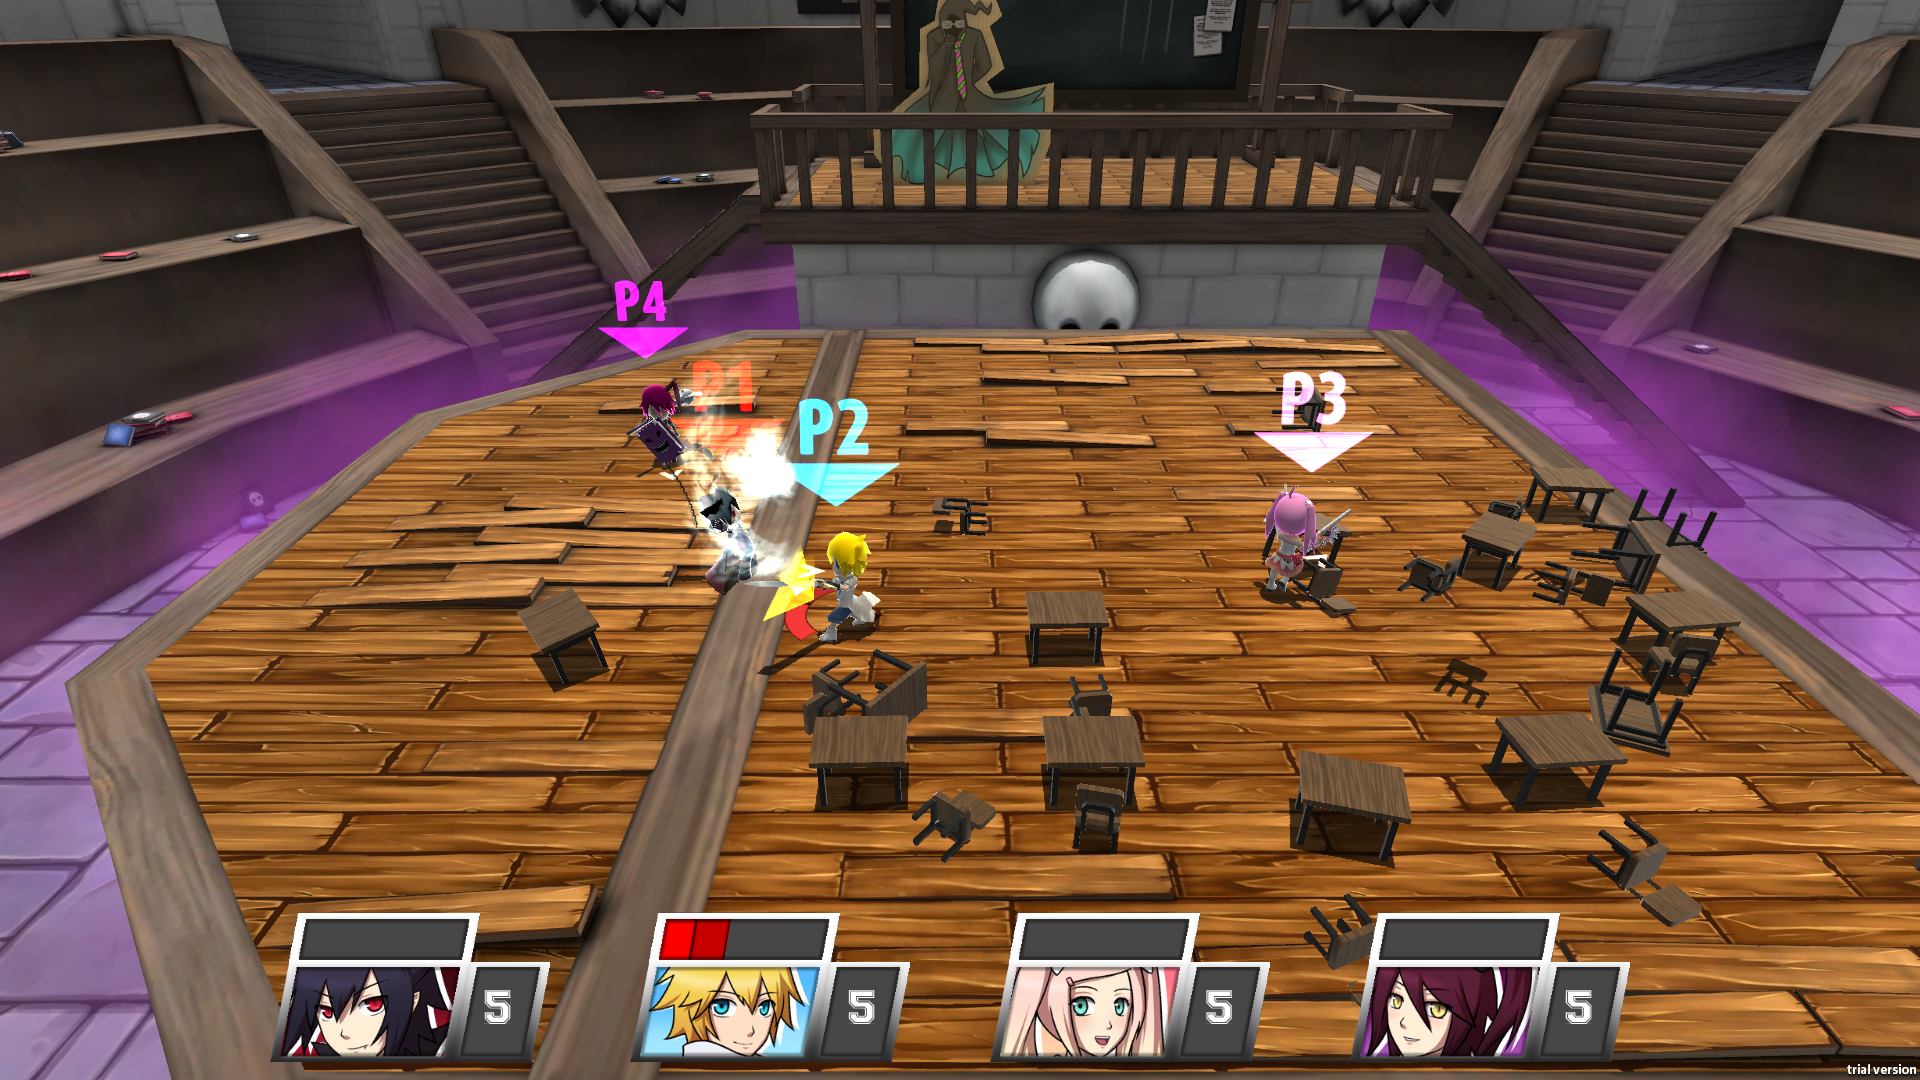 More chaos insued as parts of the level are taken away as you can see on the right side there. I believe I had to play the pink haired heroine, not normally my thing, but anything for science right?